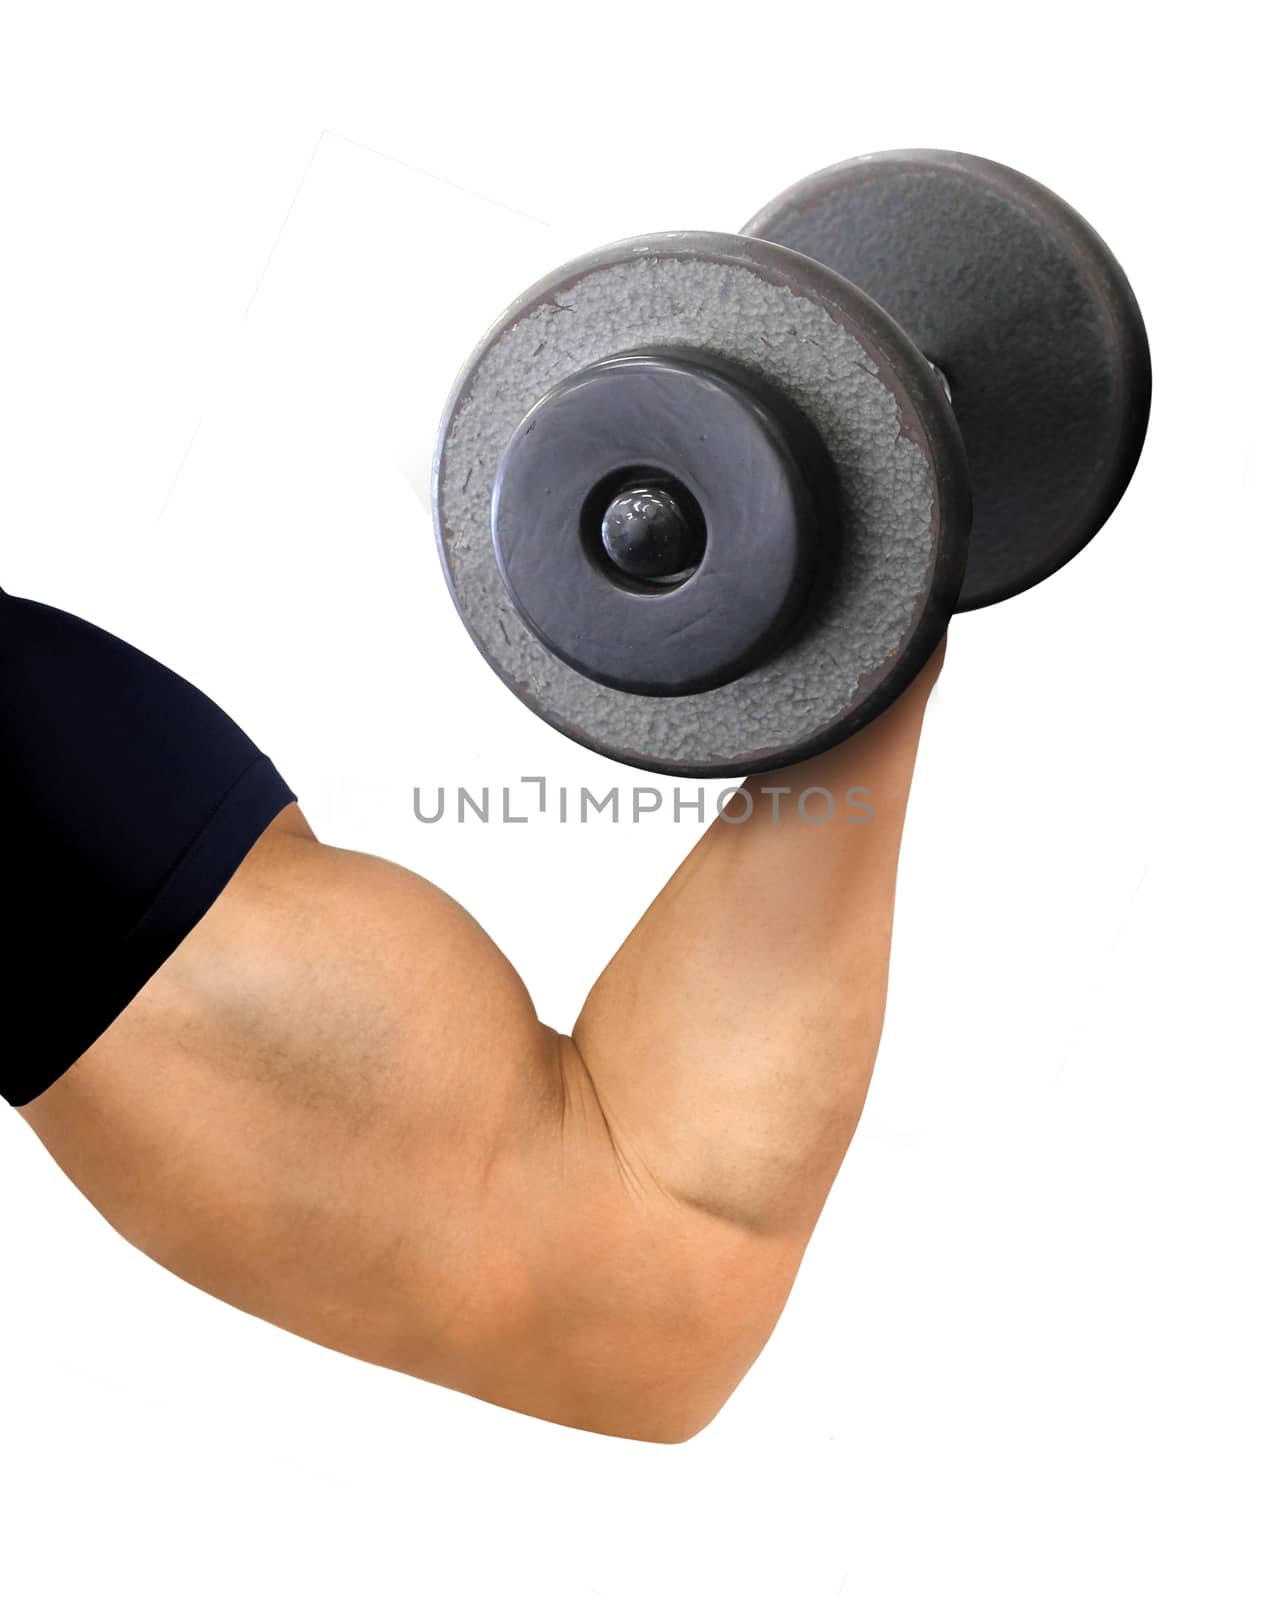 Muscular Arm and Hand Holding Dumbbell